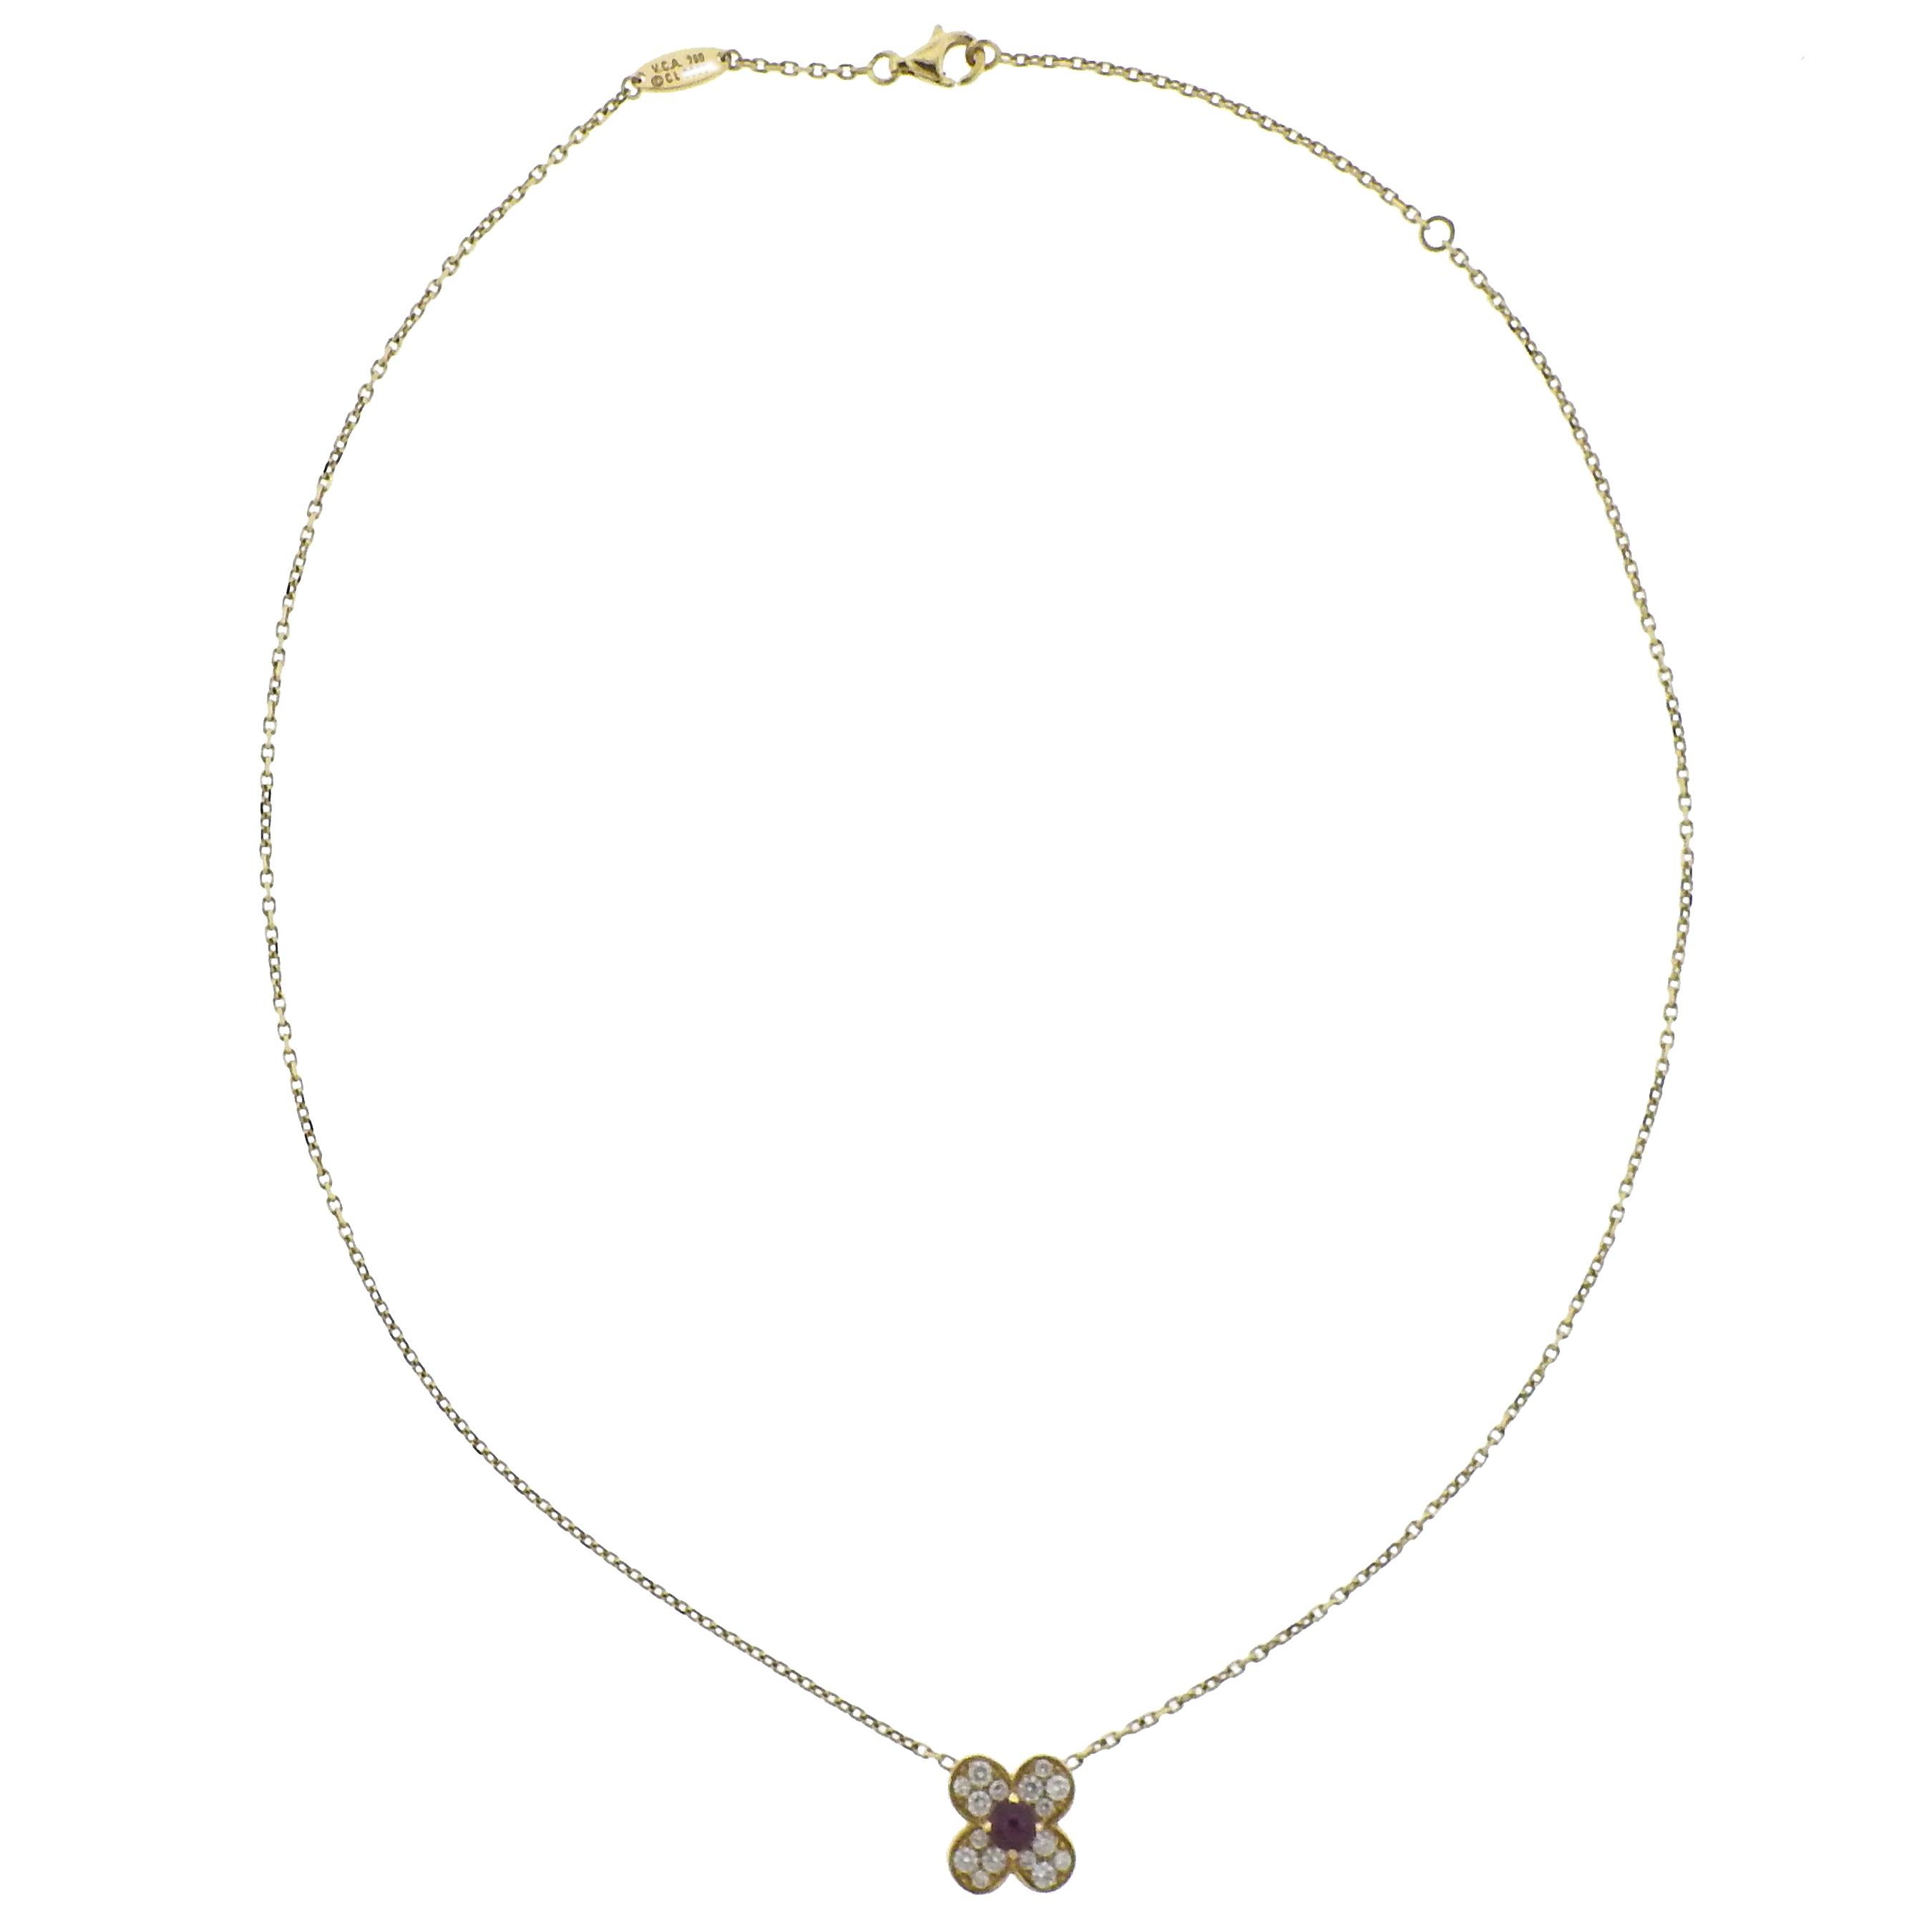 18K Gold Necklace crafted by Van Cleef & Arpels for the Trefle collection.  Necklace measures 16